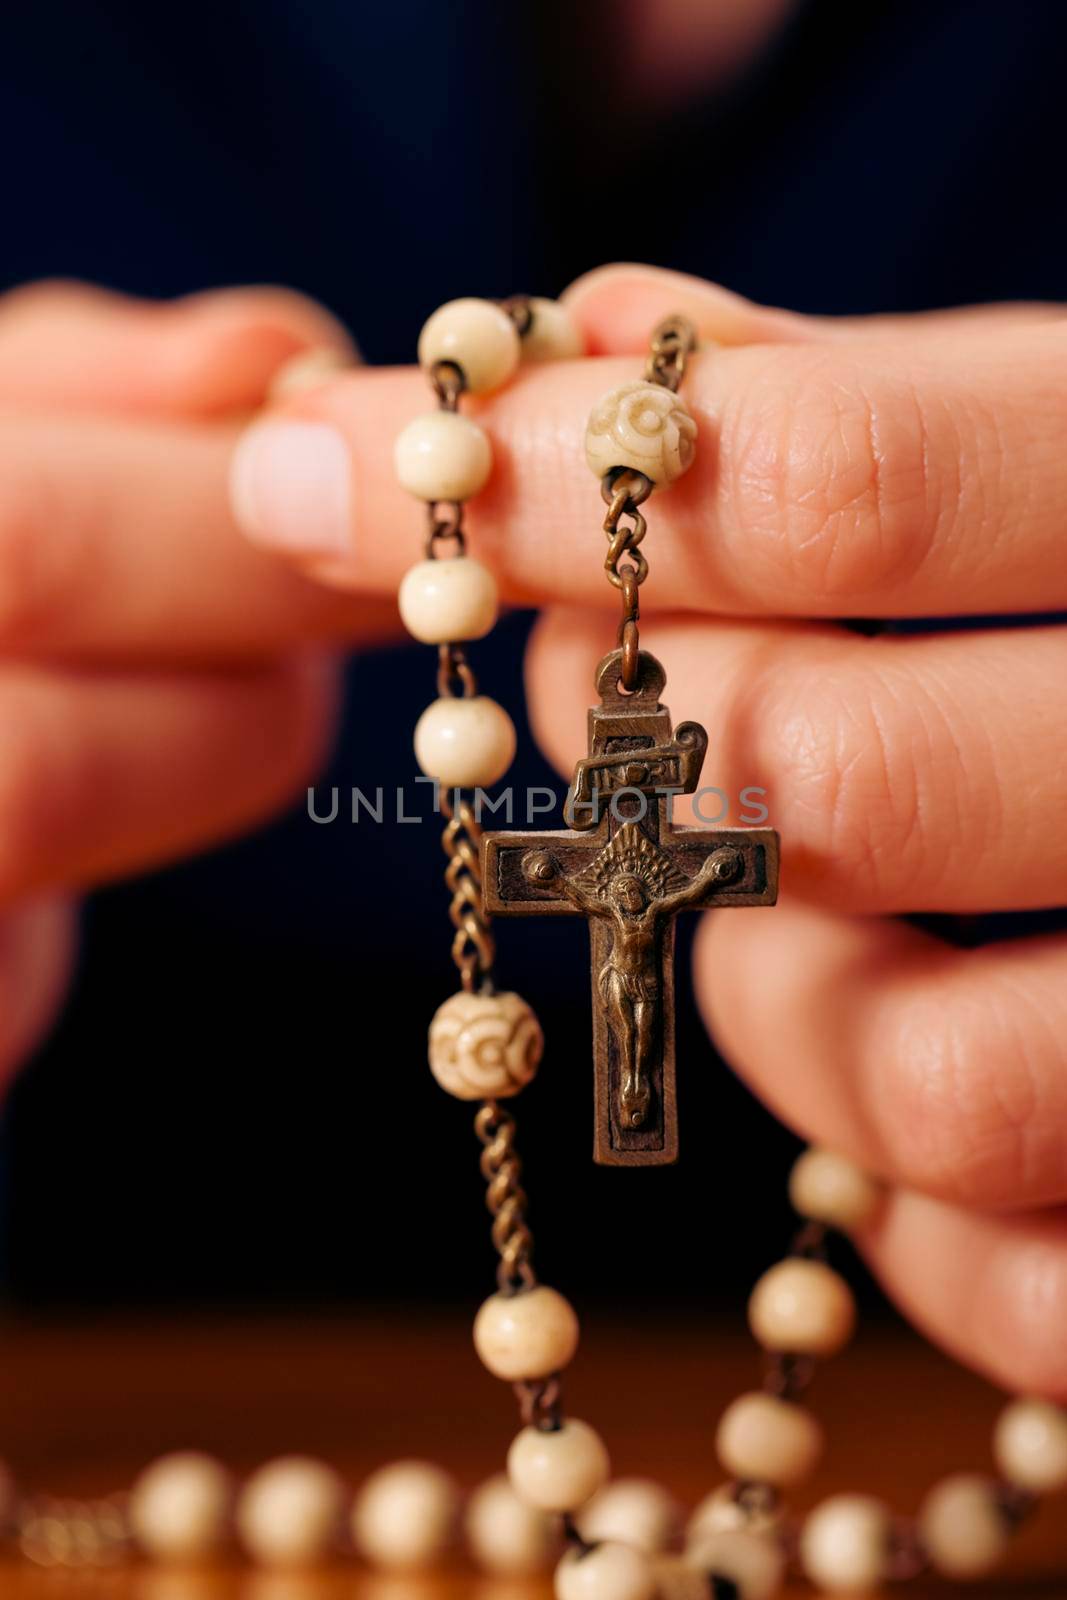 Woman (only closeup of hands to be seen) with rosary sending a prayer to God, the dark setting suggests she is sad or lonely